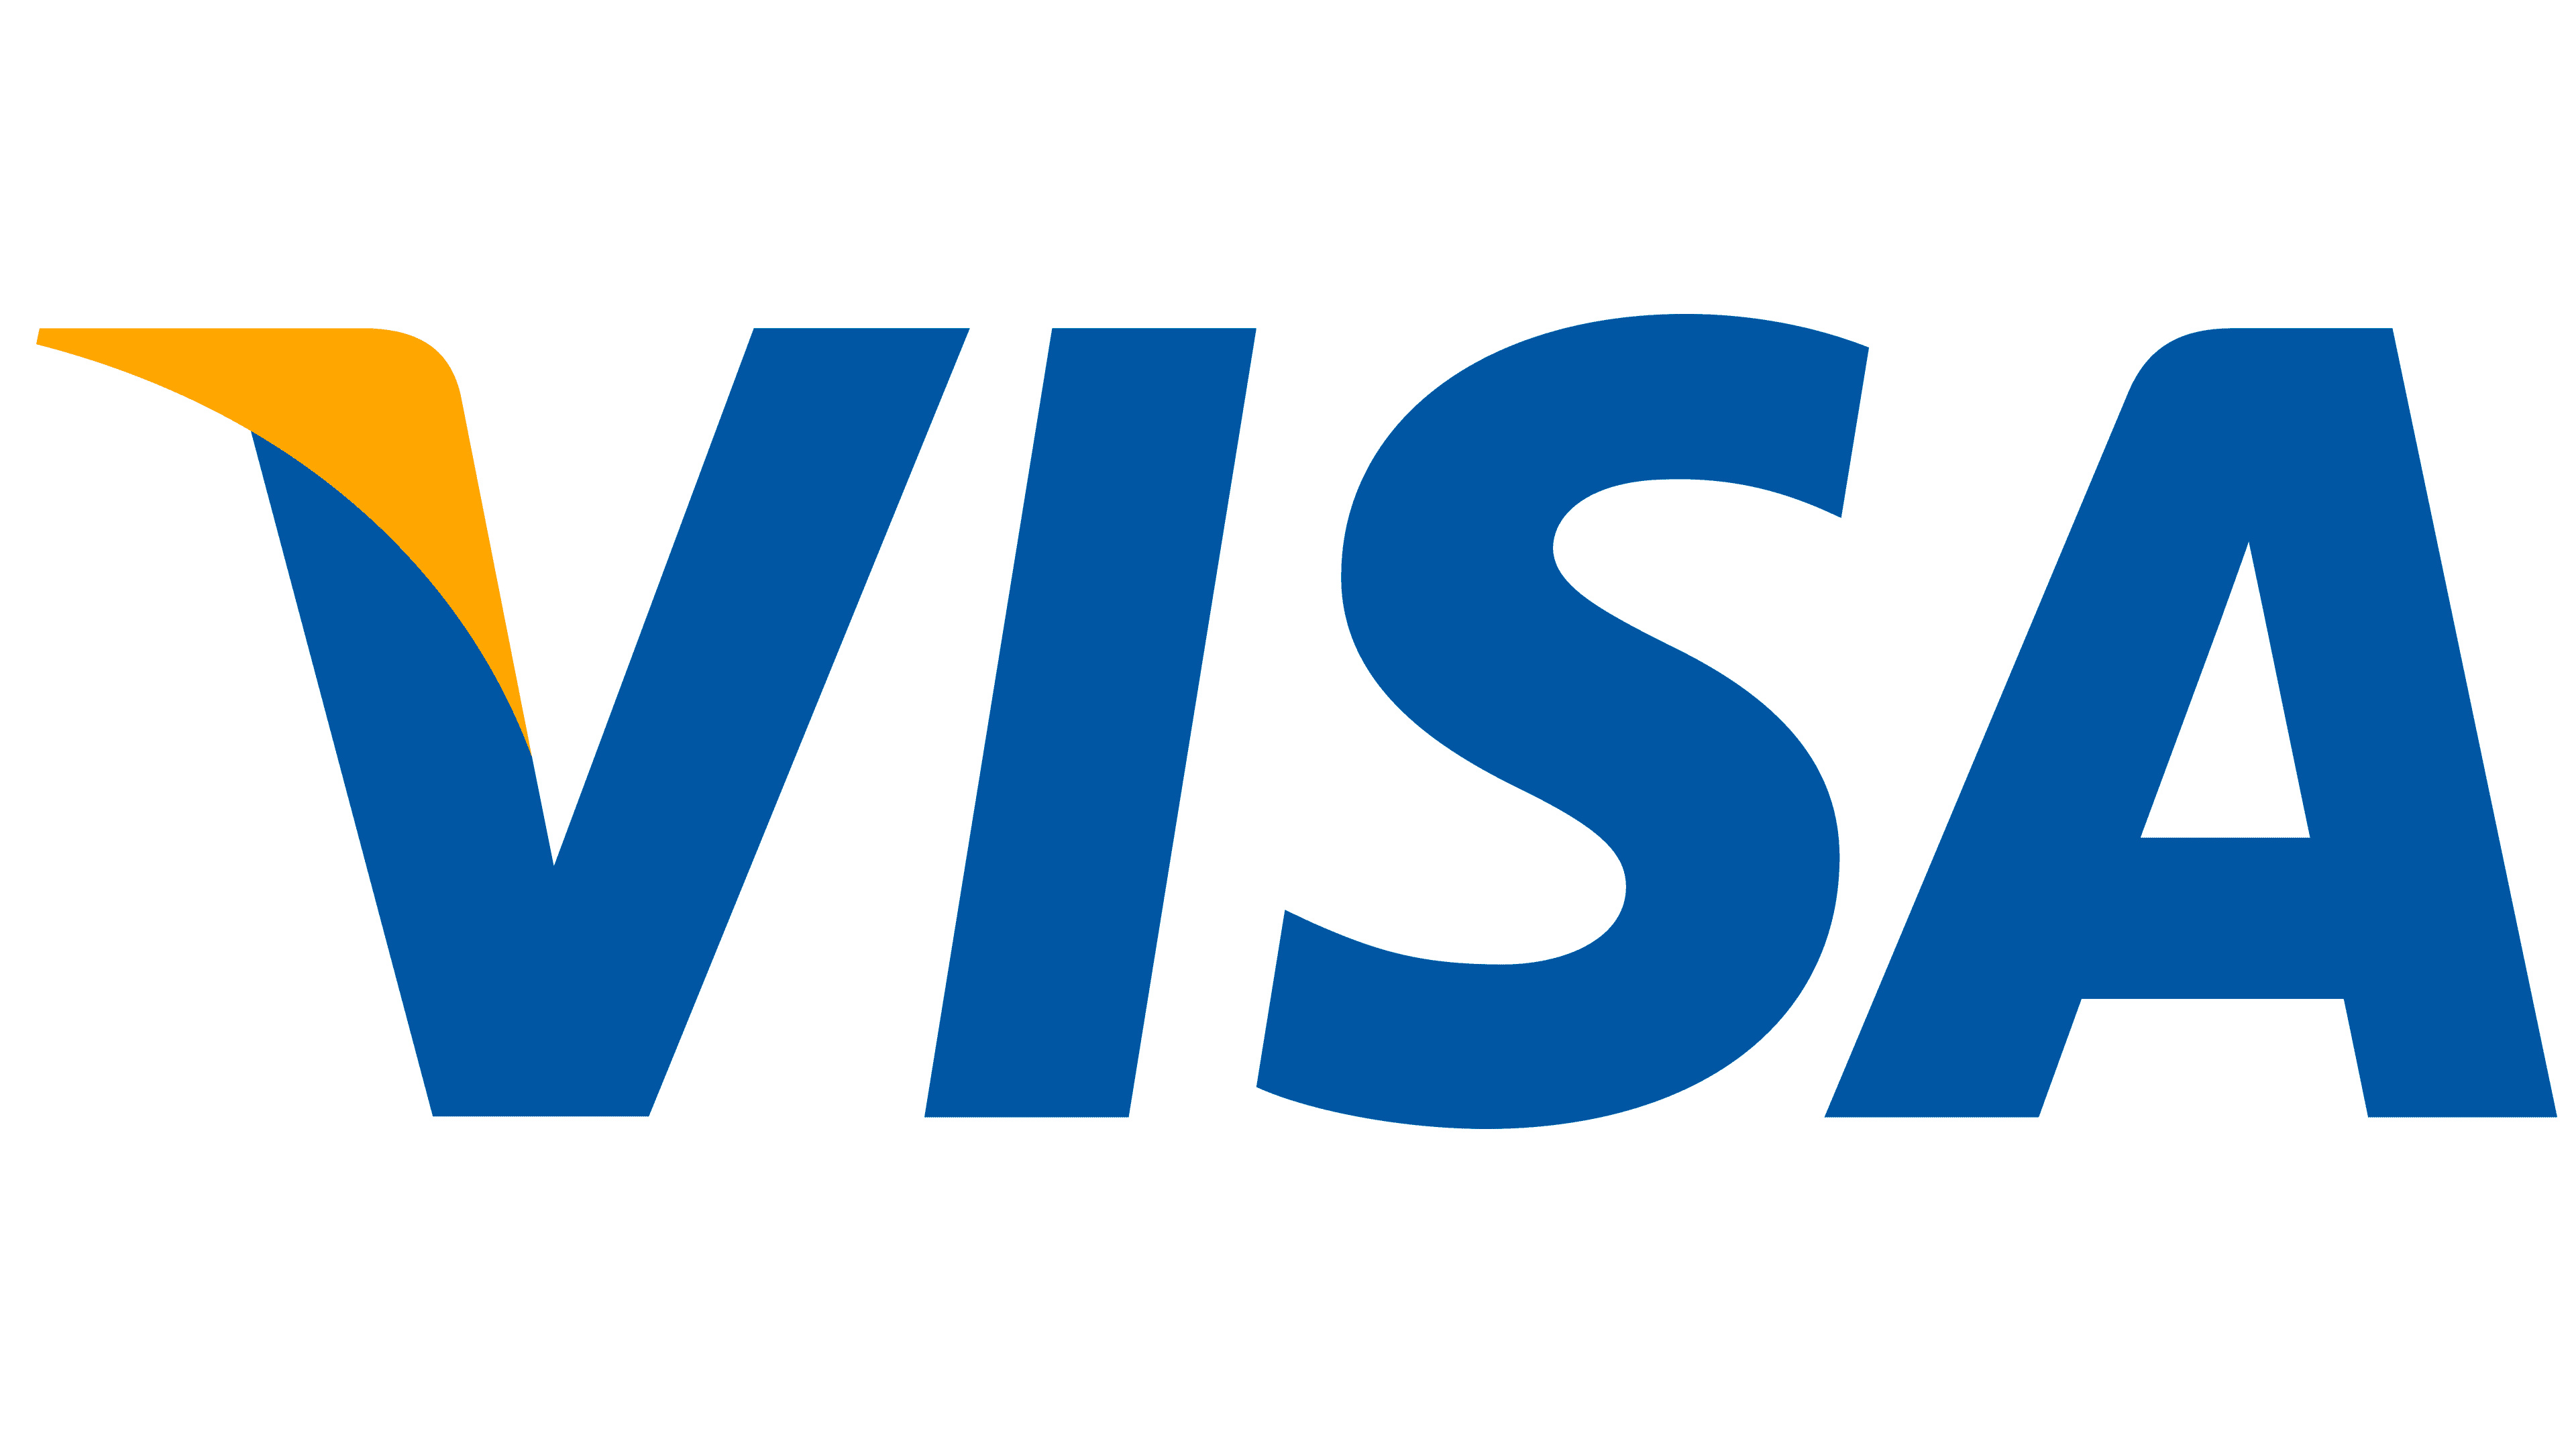 Visa (Card): The company provides financial institutions payment products. 3840x2160 4K Background.